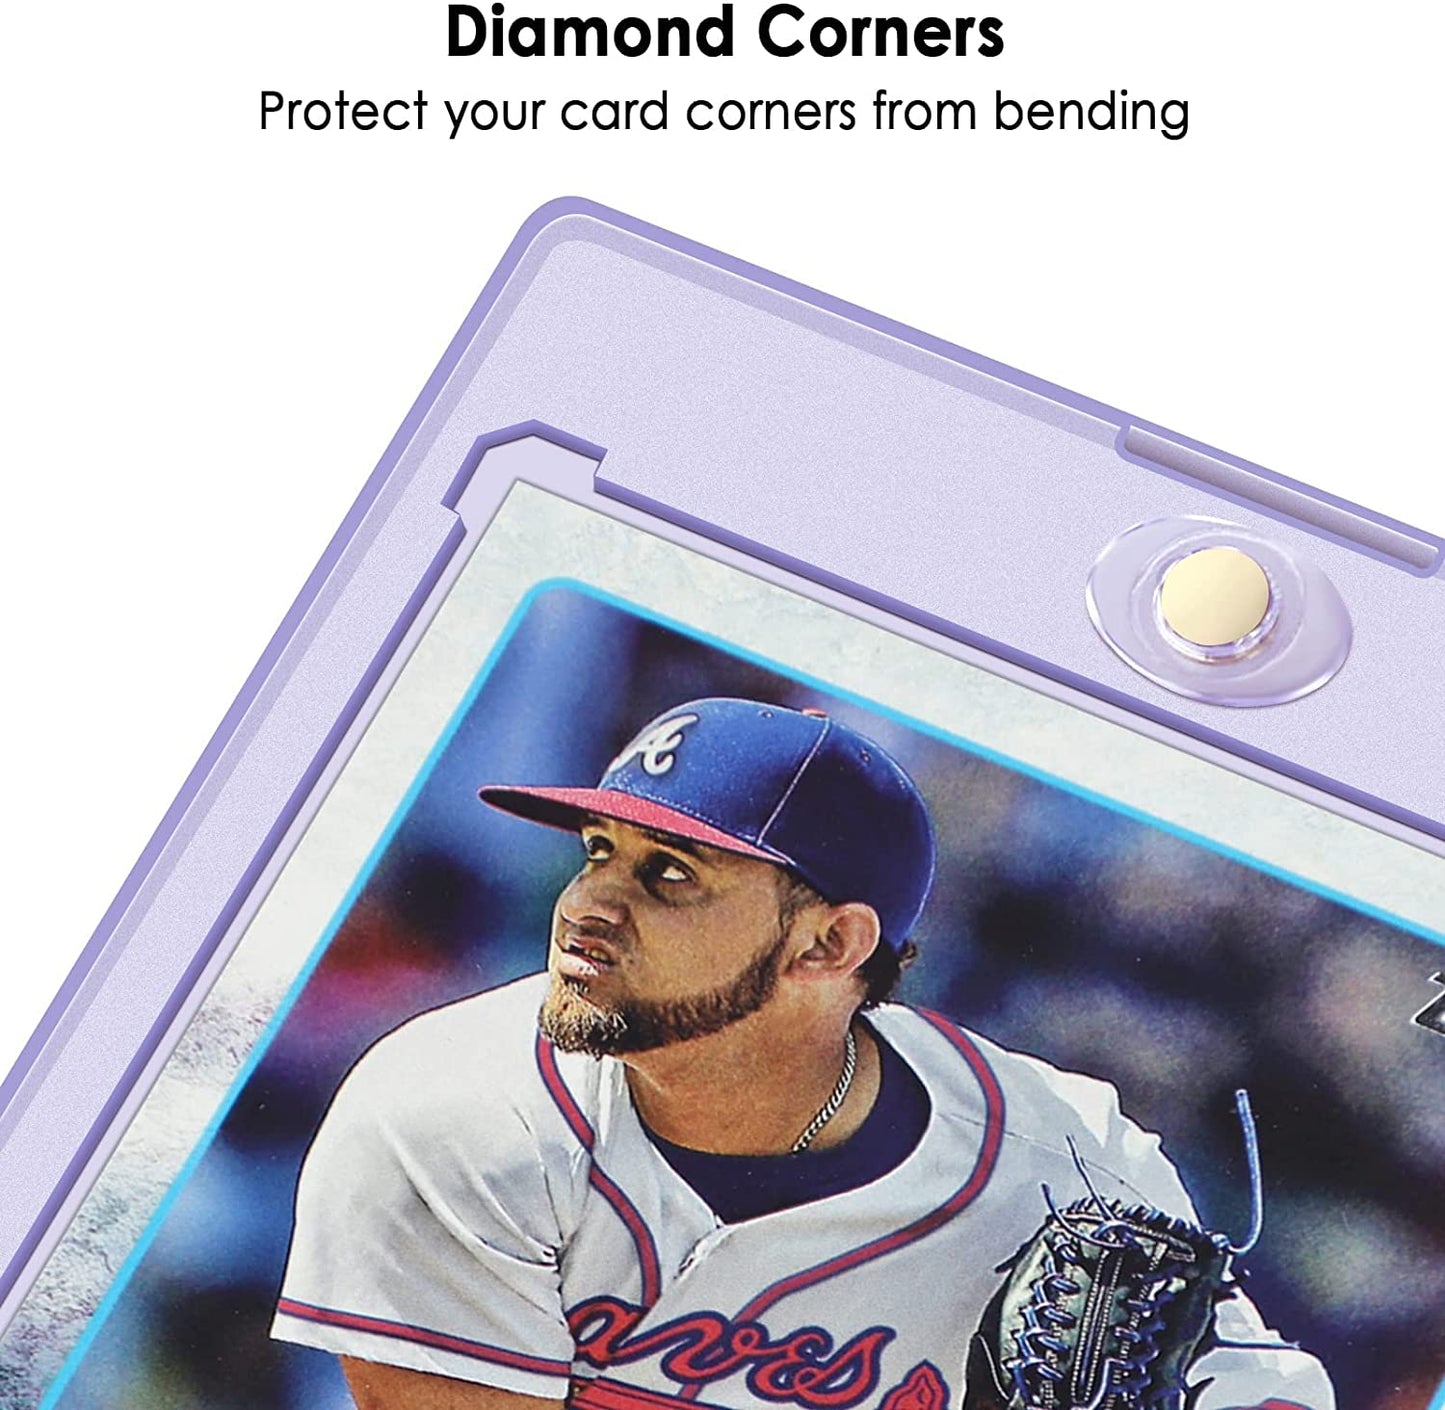 6 ct Magnetic Card Holder Case for Trading Card - 35pt Magnet Top Loaders Baseball Card Holder with UV Protection Acrylic Screwdown Card Protectors Fit for MTG, Football, Sports Cards